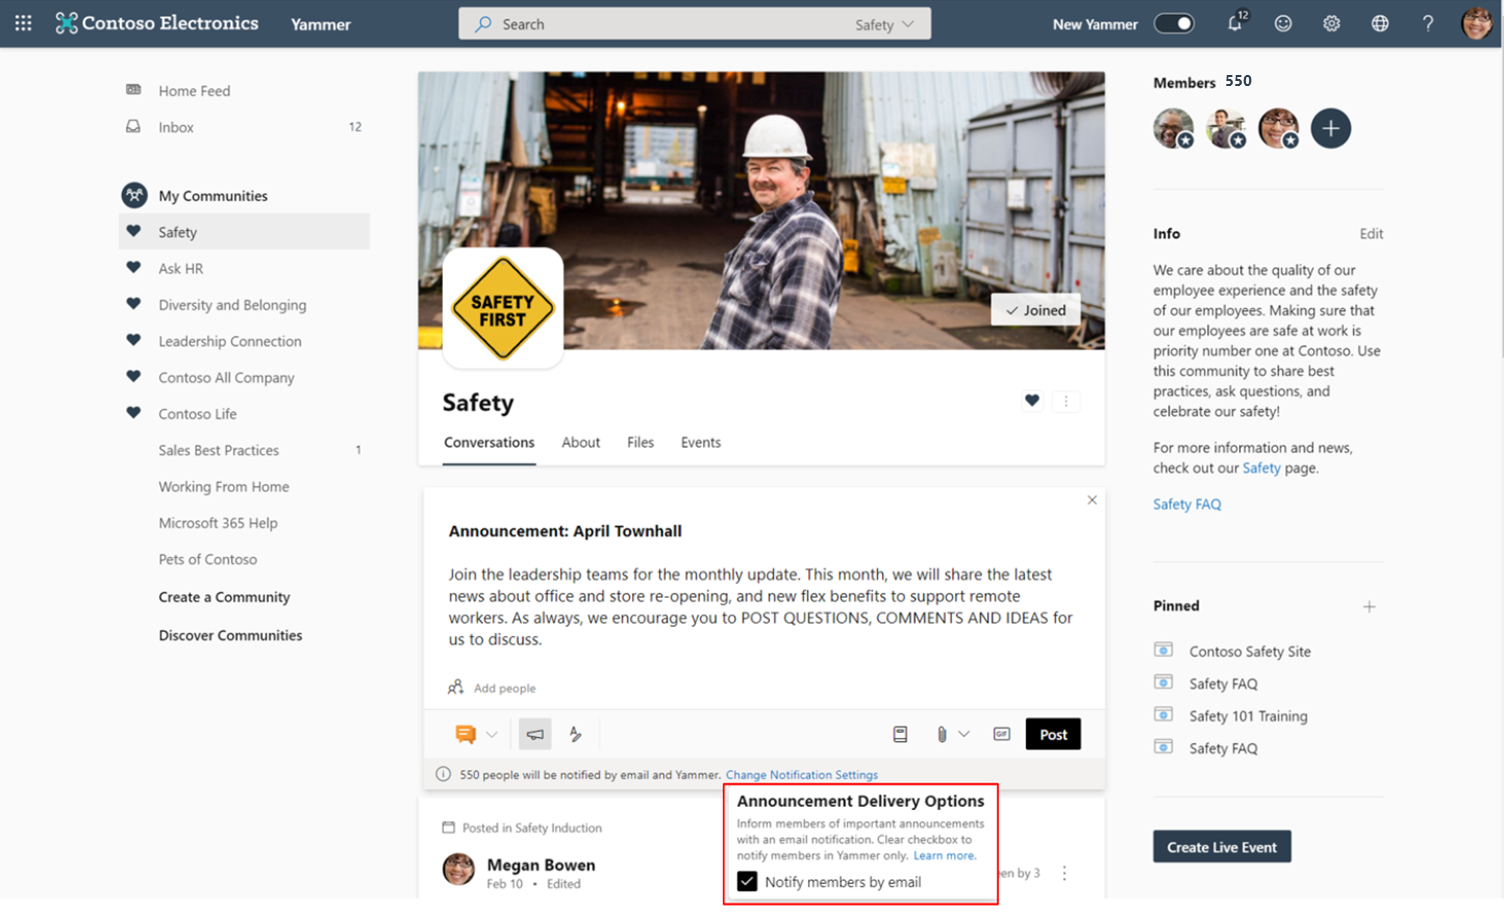 Enable Essential Announcements in Yammer